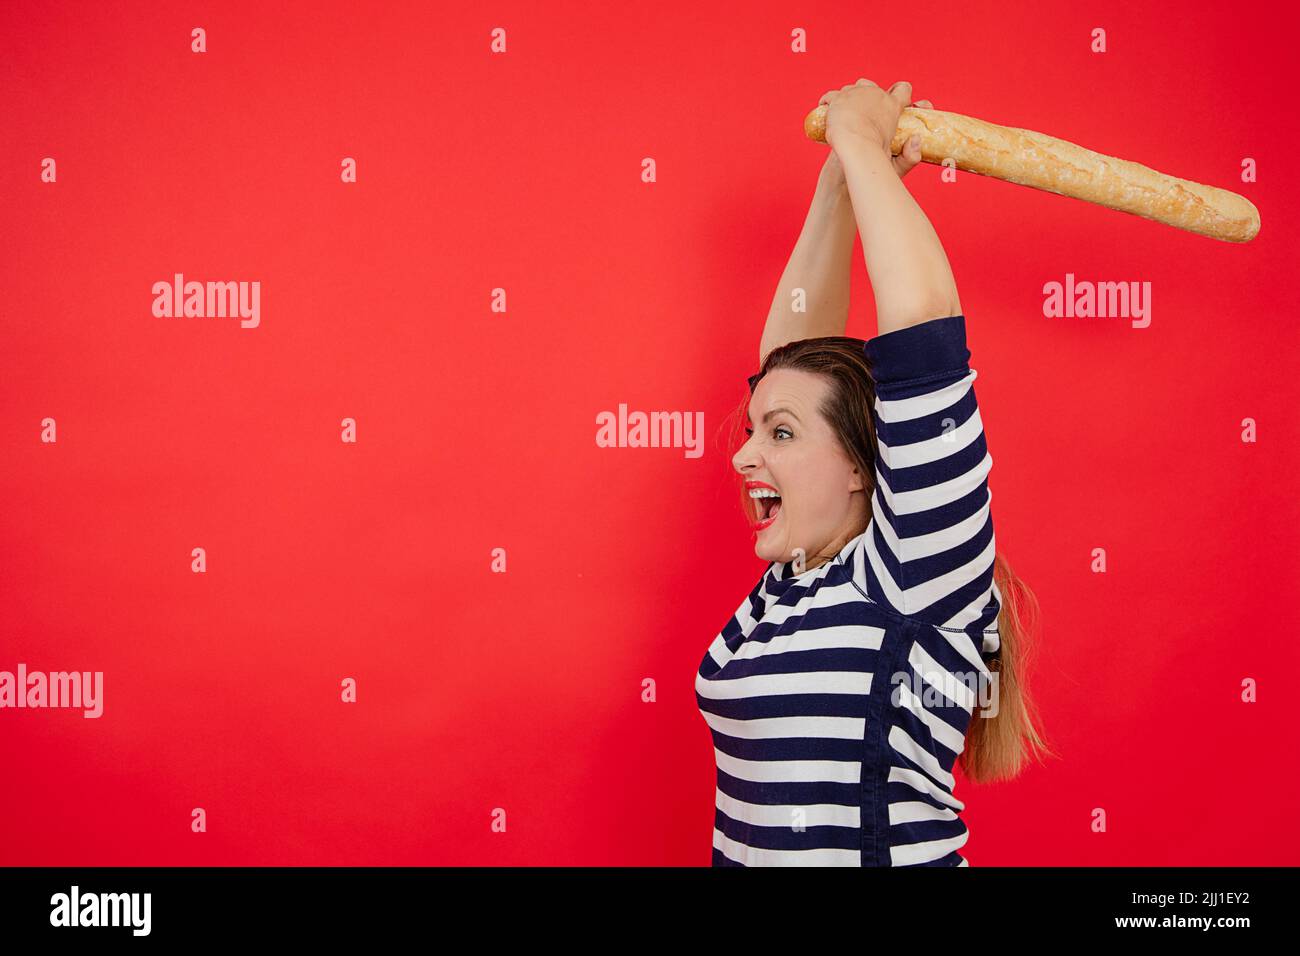 Shouting long haired plump woman in striped shirt using baguette as sword, cutting and breaking discount in red studio Stock Photo